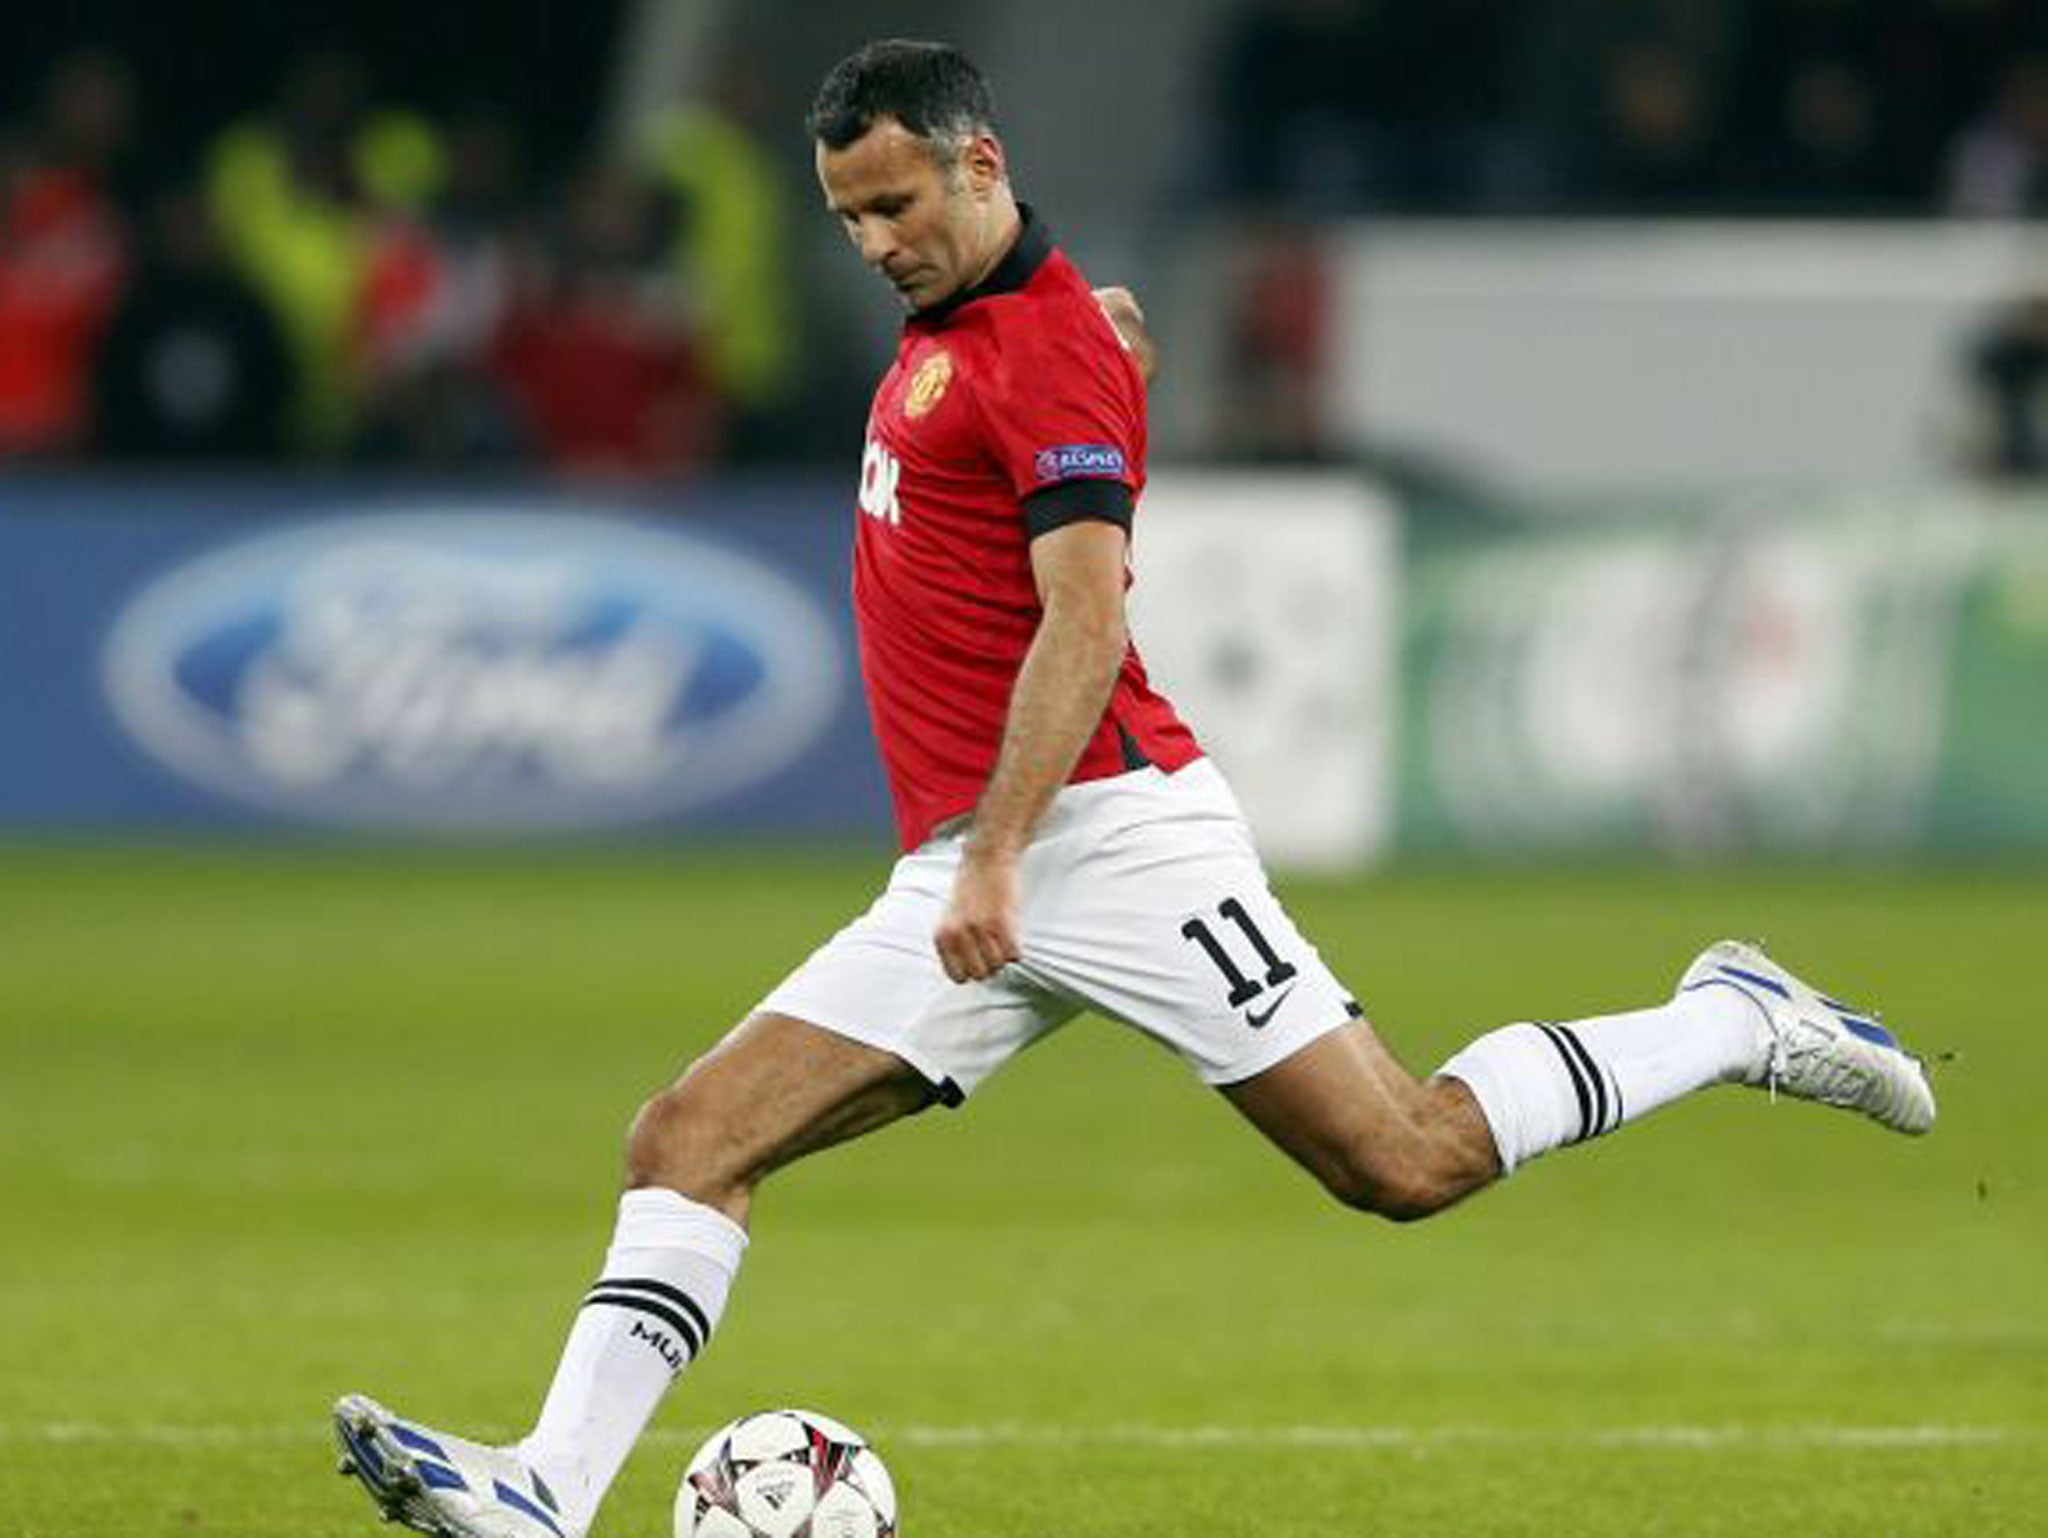 Ryan Giggs makes a pass during Manchester United's 5-0 victory over Bayer Leverkusen on Wednesday